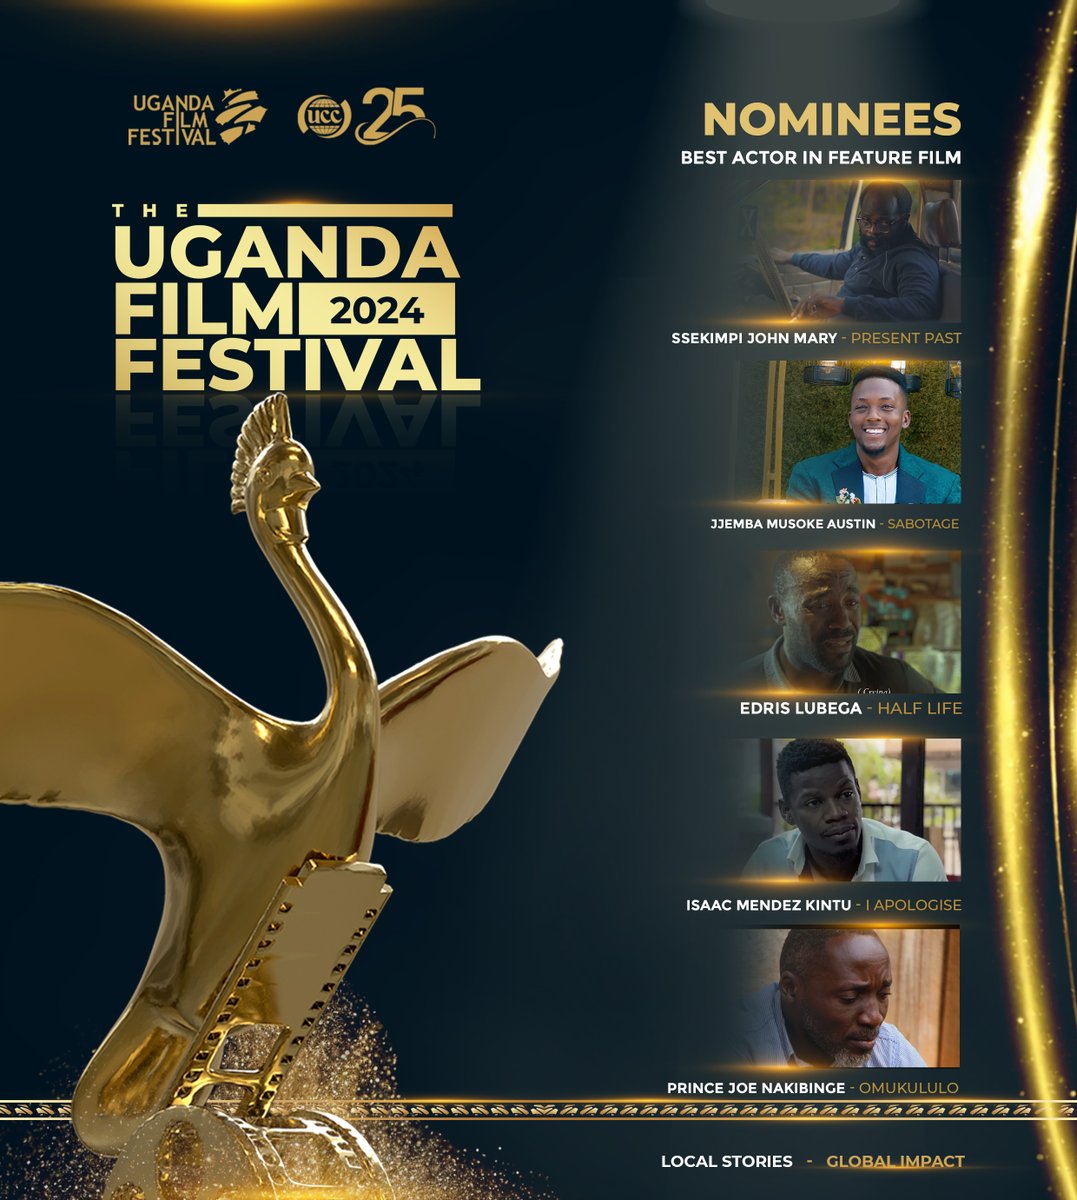 Congratulations to the nominees for Best Actor in Feature Film in #UFF2024. Edris Lubega -Half Life Prince Joe Nakibinge -Omukululo saac Mendez Kintu -I Apologize Jemba Musokke Austine -Sabotage Ssekimpi John Mary Present Past #LocalStoriesGlobalimpact Cc: @UCC_Official